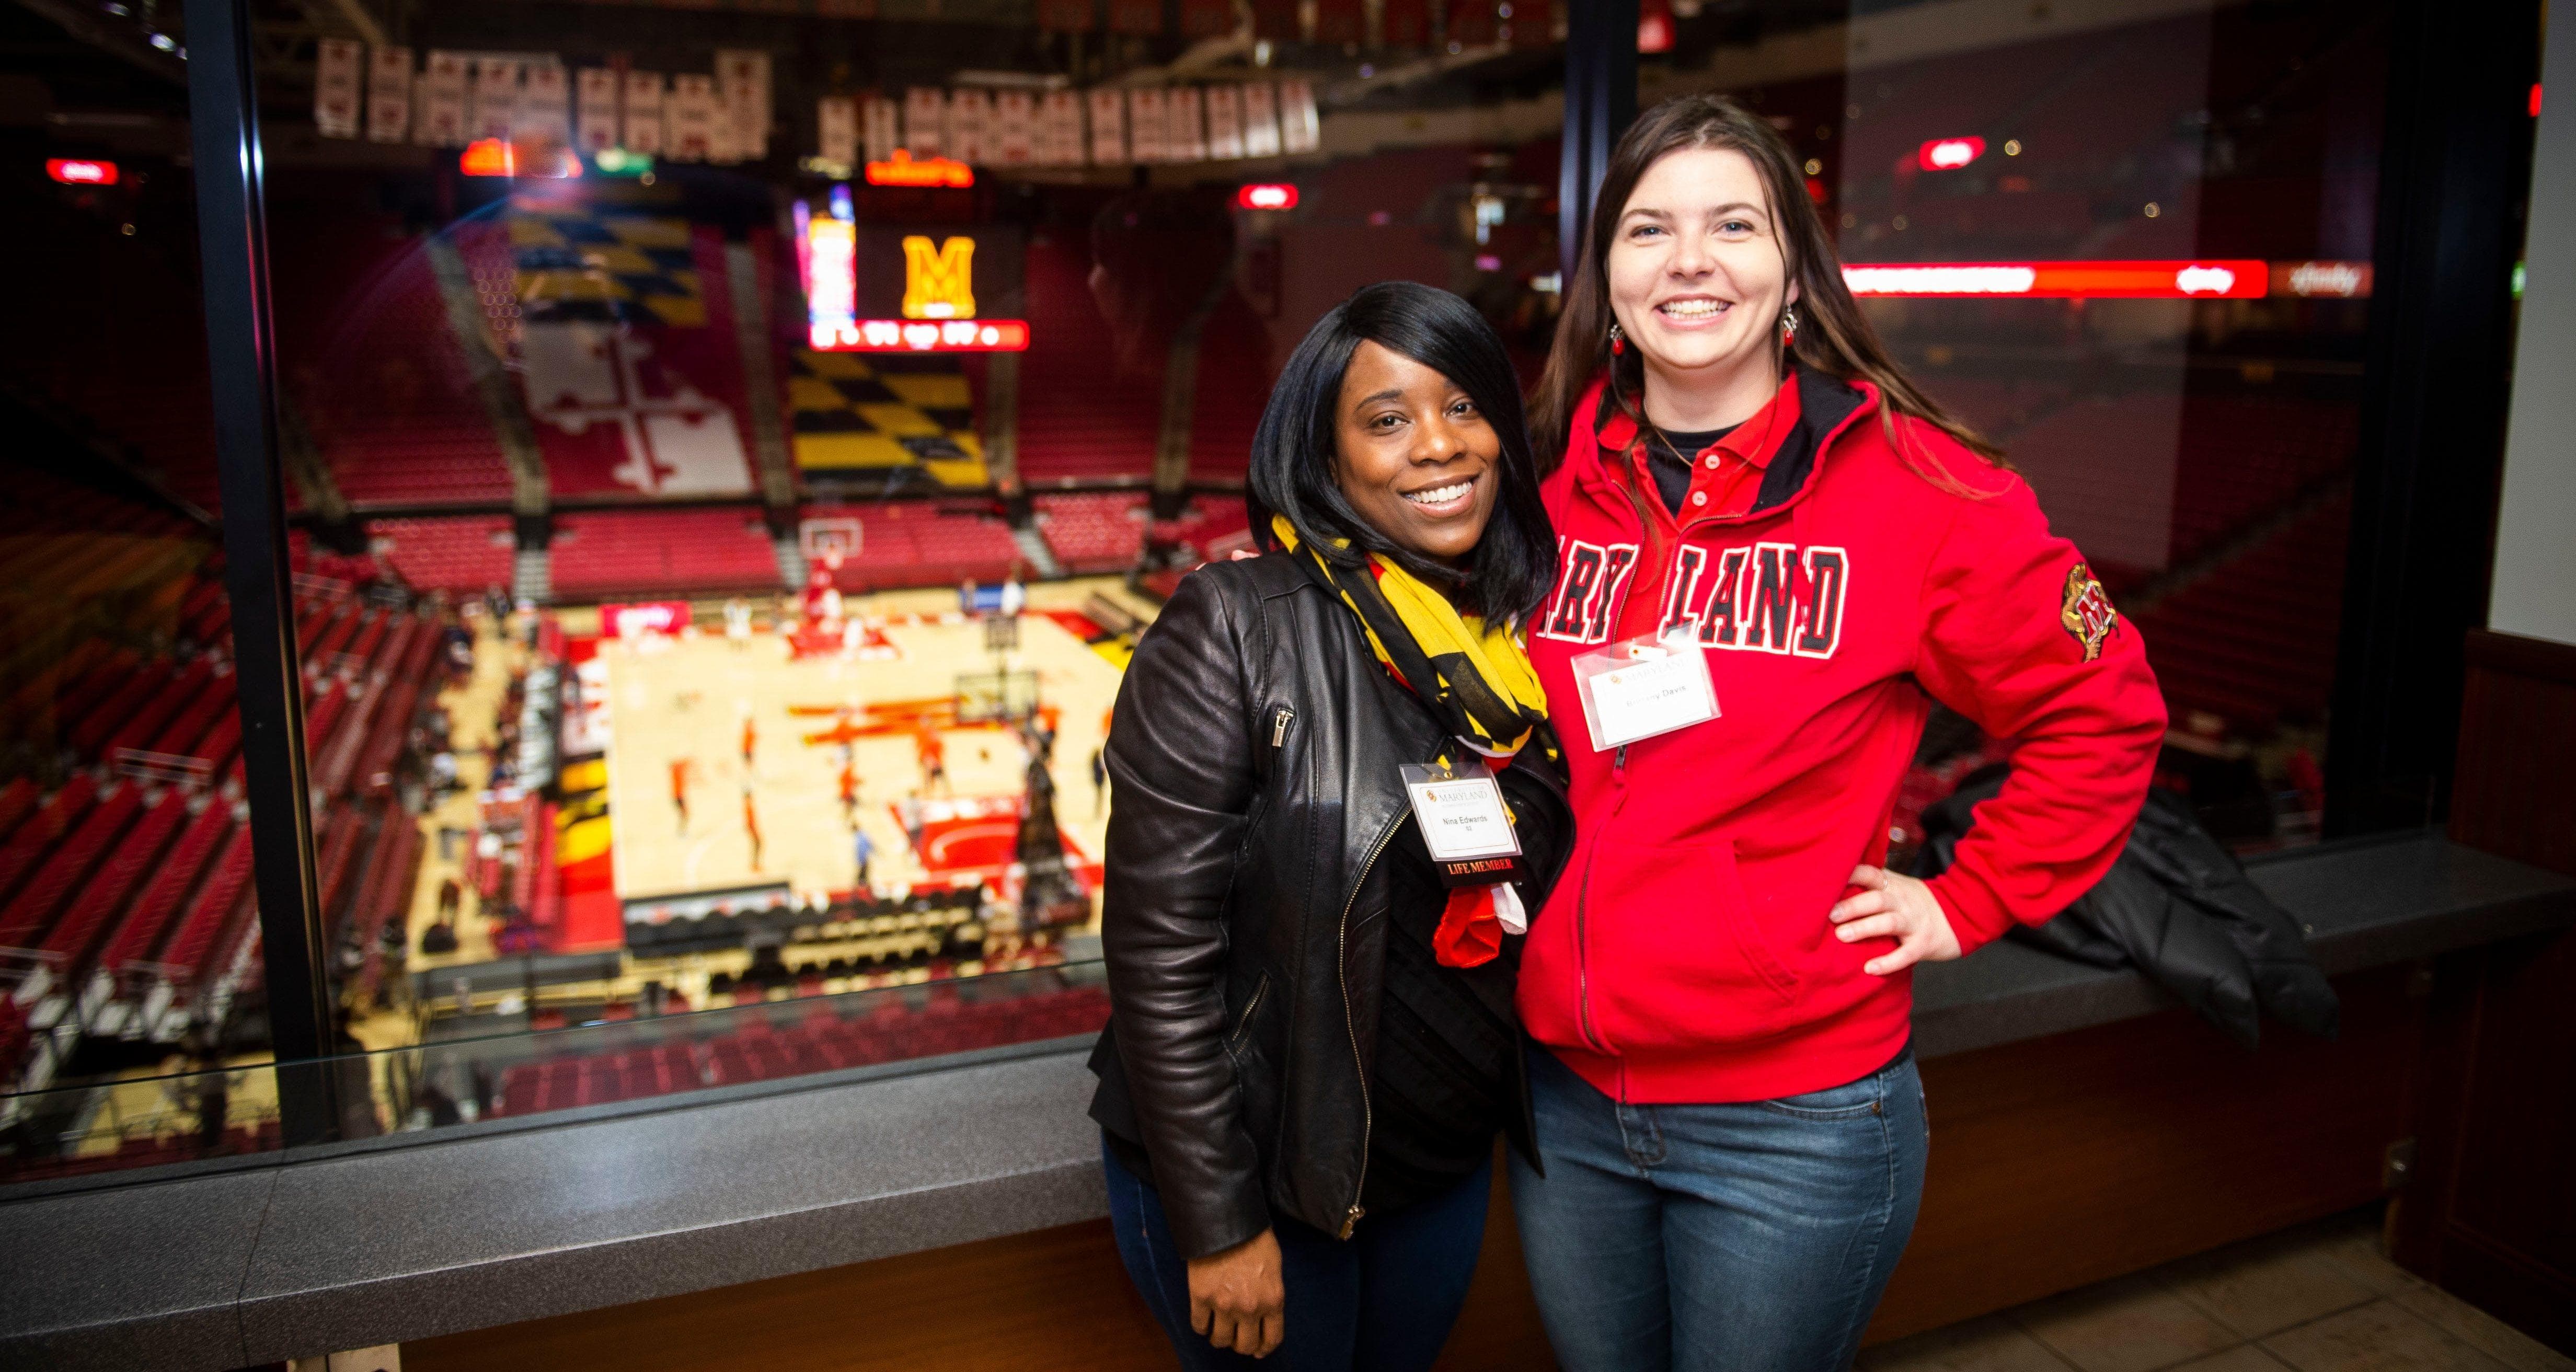 Alums overlooking the basketball court in Xfinity Center